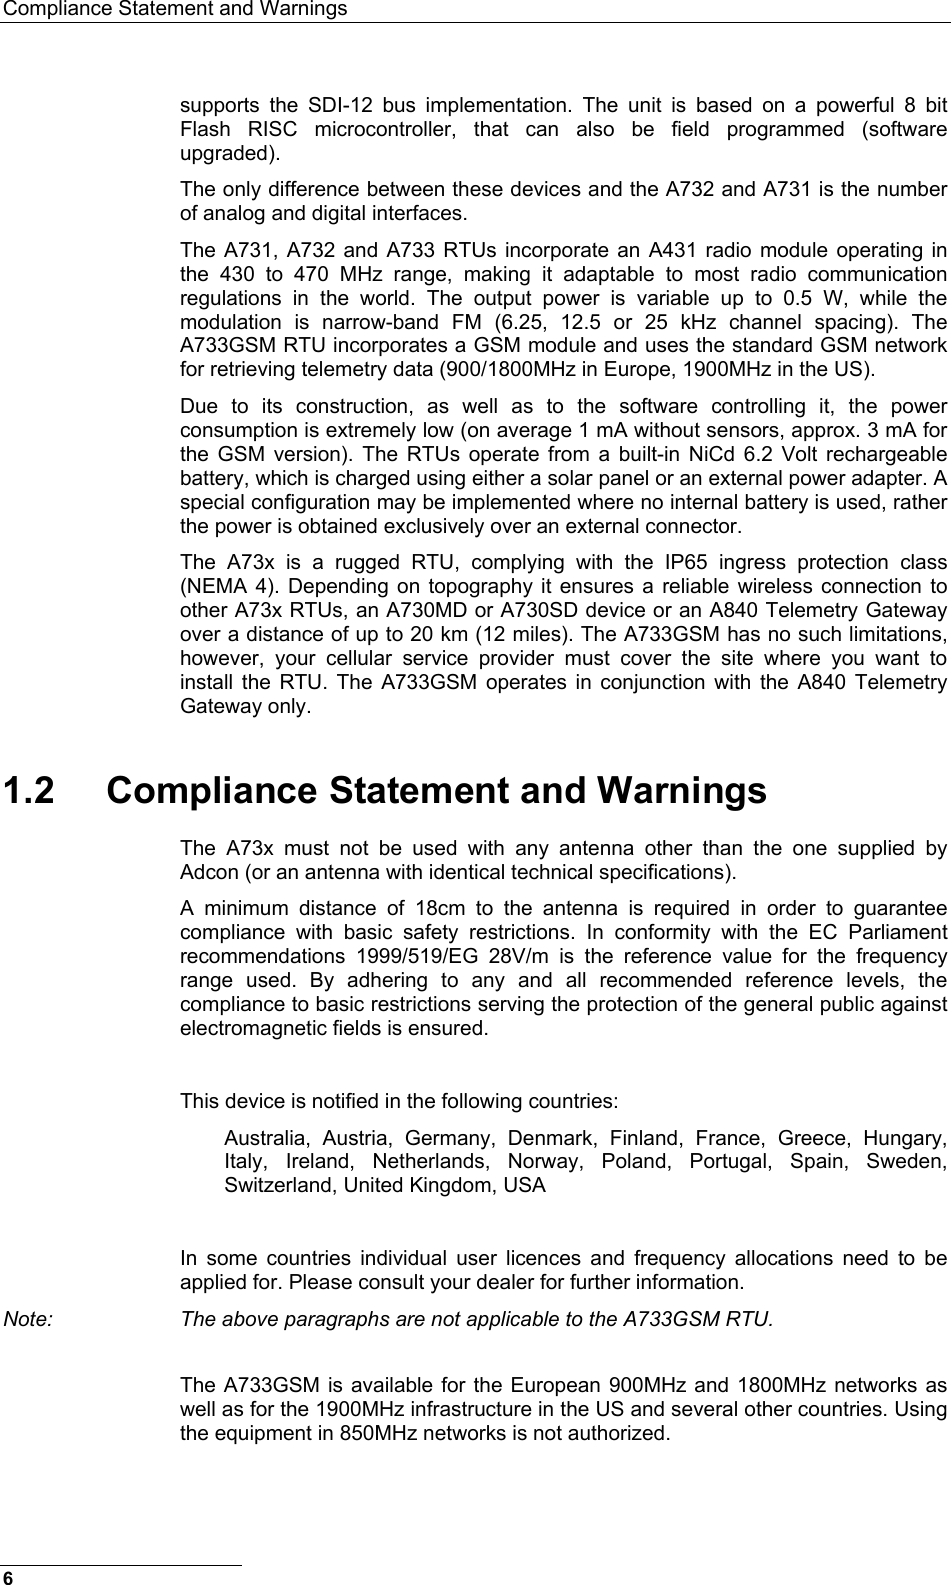 Compliance Statement and Warnings  6 supports the SDI-12 bus implementation. The unit is based on a powerful 8 bit Flash RISC microcontroller, that can also be field programmed (software upgraded). The only difference between these devices and the A732 and A731 is the number of analog and digital interfaces. The A731, A732 and A733 RTUs incorporate an A431 radio module operating in the 430 to 470 MHz range, making it adaptable to most radio communication regulations in the world. The output power is variable up to 0.5 W, while the modulation is narrow-band FM (6.25, 12.5 or 25 kHz channel spacing). The A733GSM RTU incorporates a GSM module and uses the standard GSM network for retrieving telemetry data (900/1800MHz in Europe, 1900MHz in the US). Due to its construction, as well as to the software controlling it, the power consumption is extremely low (on average 1 mA without sensors, approx. 3 mA for the GSM version). The RTUs operate from a built-in NiCd 6.2 Volt rechargeable battery, which is charged using either a solar panel or an external power adapter. A special configuration may be implemented where no internal battery is used, rather the power is obtained exclusively over an external connector. The A73x is a rugged RTU, complying with the IP65 ingress protection class (NEMA 4). Depending on topography it ensures a reliable wireless connection to other A73x RTUs, an A730MD or A730SD device or an A840 Telemetry Gateway over a distance of up to 20 km (12 miles). The A733GSM has no such limitations, however, your cellular service provider must cover the site where you want to install the RTU. The A733GSM operates in conjunction with the A840 Telemetry Gateway only. 1.2  Compliance Statement and Warnings The A73x must not be used with any antenna other than the one supplied by Adcon (or an antenna with identical technical specifications). A minimum distance of 18cm to the antenna is required in order to guarantee compliance with basic safety restrictions. In conformity with the EC Parliament recommendations 1999/519/EG 28V/m is the reference value for the frequency range used. By adhering to any and all recommended reference levels, the compliance to basic restrictions serving the protection of the general public against electromagnetic fields is ensured.  This device is notified in the following countries: Australia, Austria, Germany, Denmark, Finland, France, Greece, Hungary, Italy, Ireland, Netherlands, Norway, Poland, Portugal, Spain, Sweden, Switzerland, United Kingdom, USA  In some countries individual user licences and frequency allocations need to be applied for. Please consult your dealer for further information. Note:  The above paragraphs are not applicable to the A733GSM RTU.  The A733GSM is available for the European 900MHz and 1800MHz networks as well as for the 1900MHz infrastructure in the US and several other countries. Using the equipment in 850MHz networks is not authorized.  